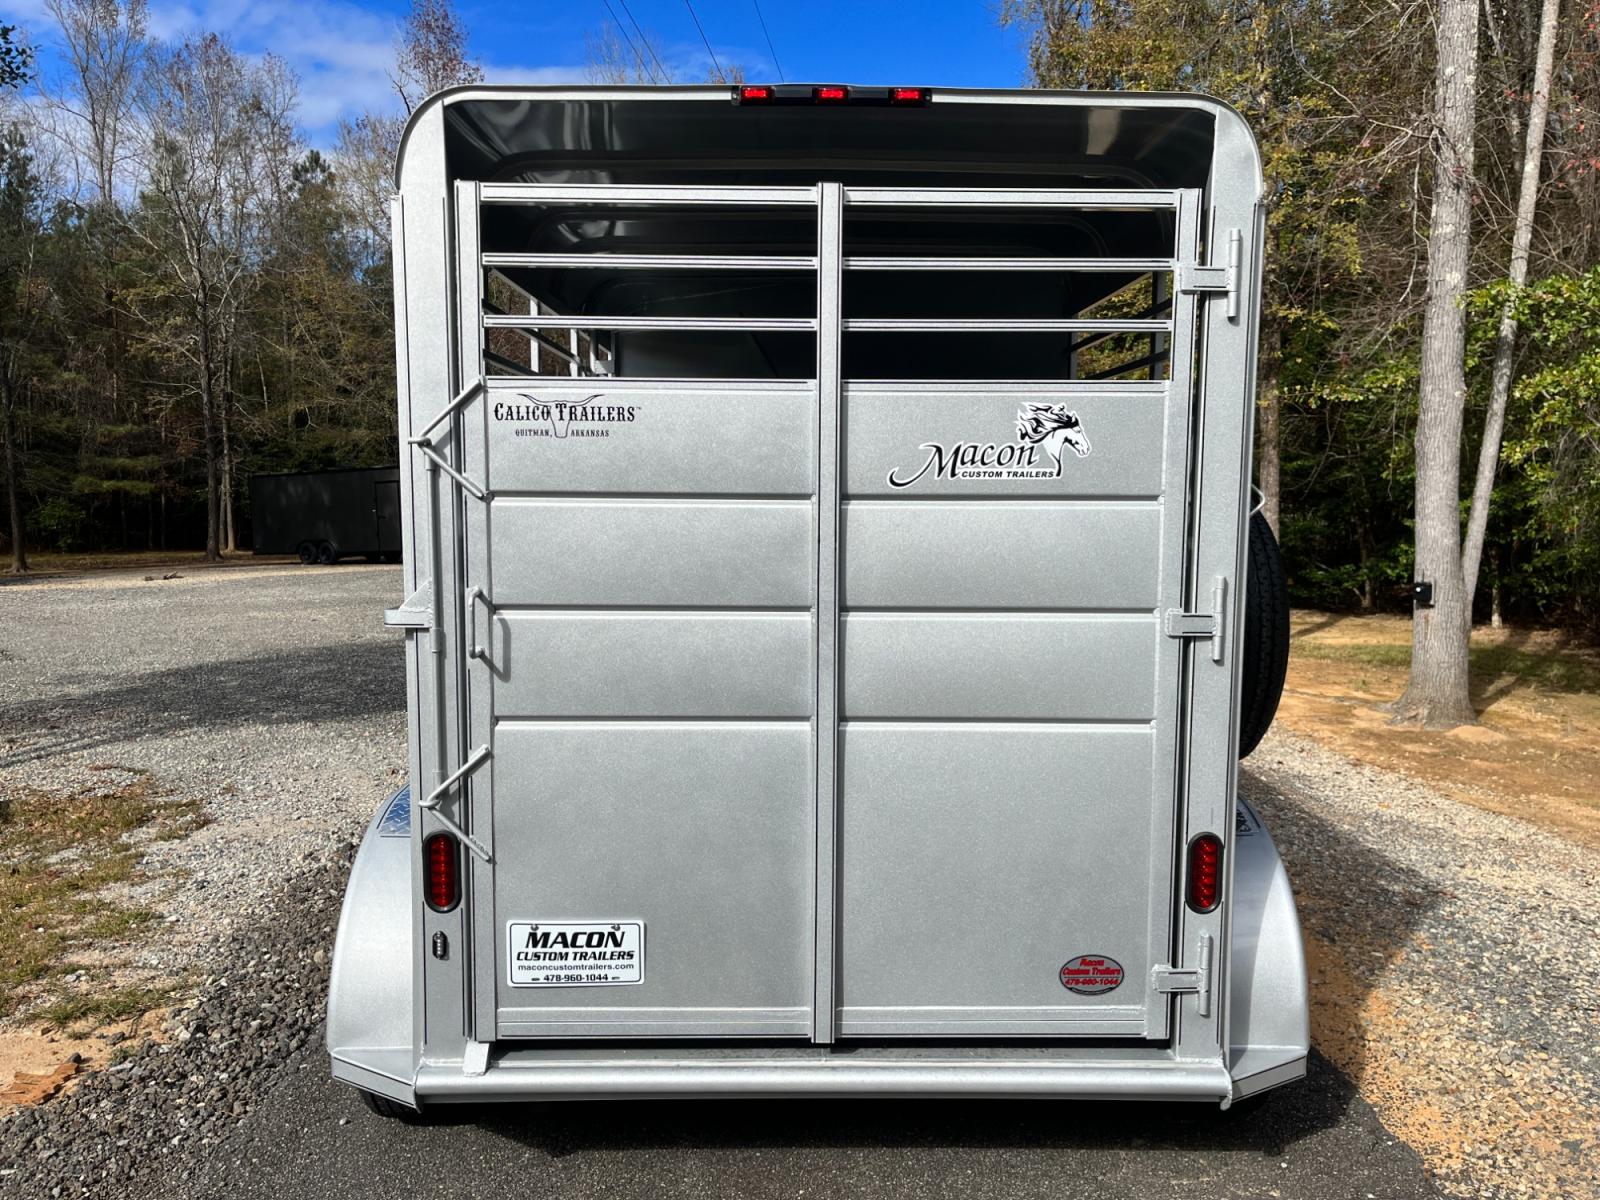 2023 Silver Metallic Calico 2 Horse Slant , located at 1330 Rainey Rd., Macon, 31220, (478) 960-1044, 32.845638, -83.778687 - Brand New 2023 Model 2 Horse Slant Calico Brand Trailer! 6ft Wide X 13ft Long Deluxe Model Tandem Axle Trailer! Easy Close Slant Divider Latch! 16" Radials! Beautiful Silver Metallic Paint is Awesome! Black Pin Striping Looks Fantastic! Fully Caulked Inside and Out to Prevent Rust! The Paint i - Photo #3